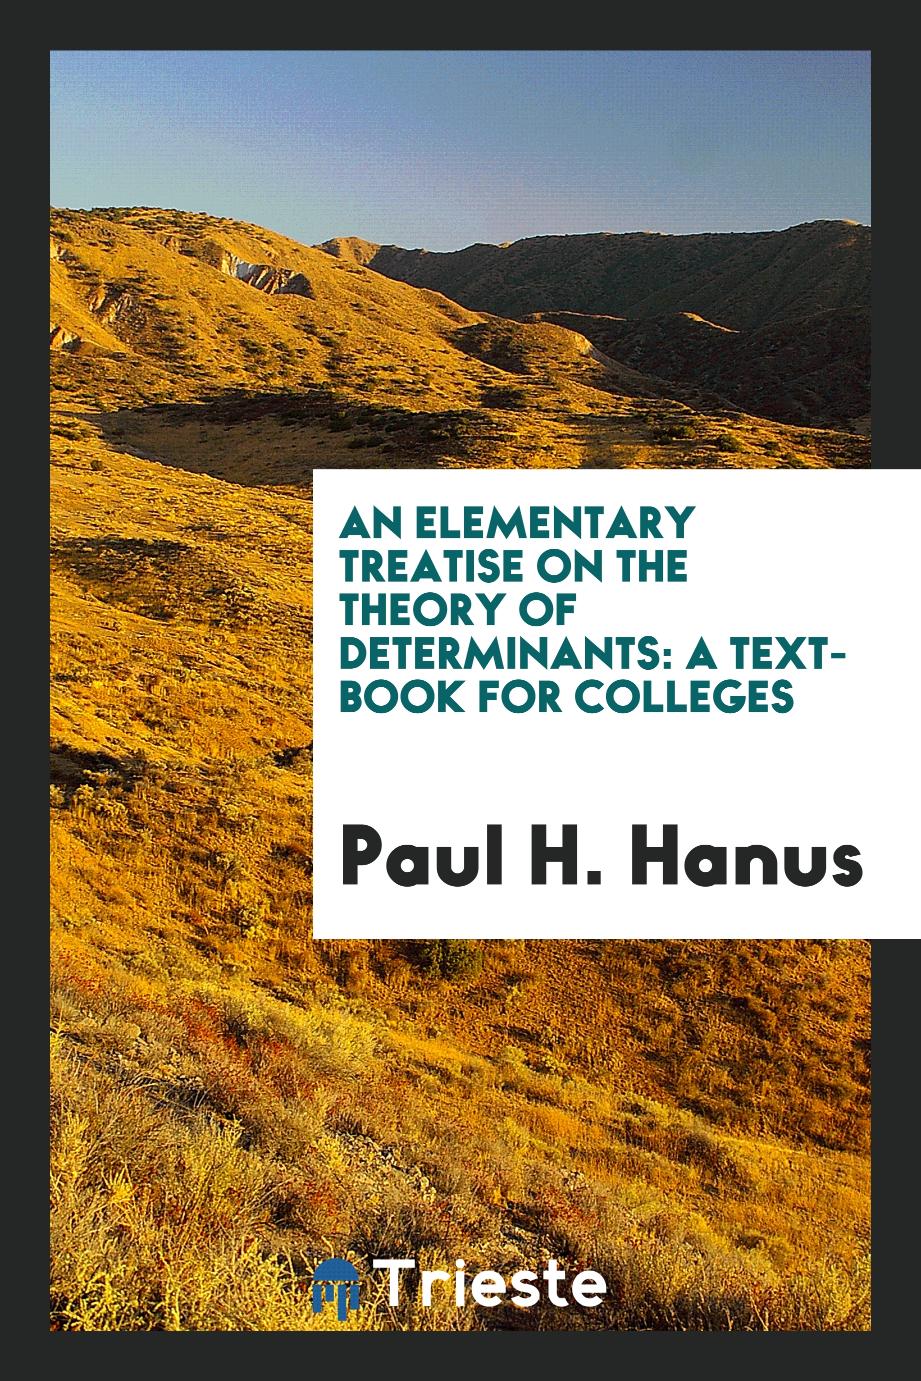 An Elementary Treatise on the Theory of Determinants: A Text-Book for Colleges